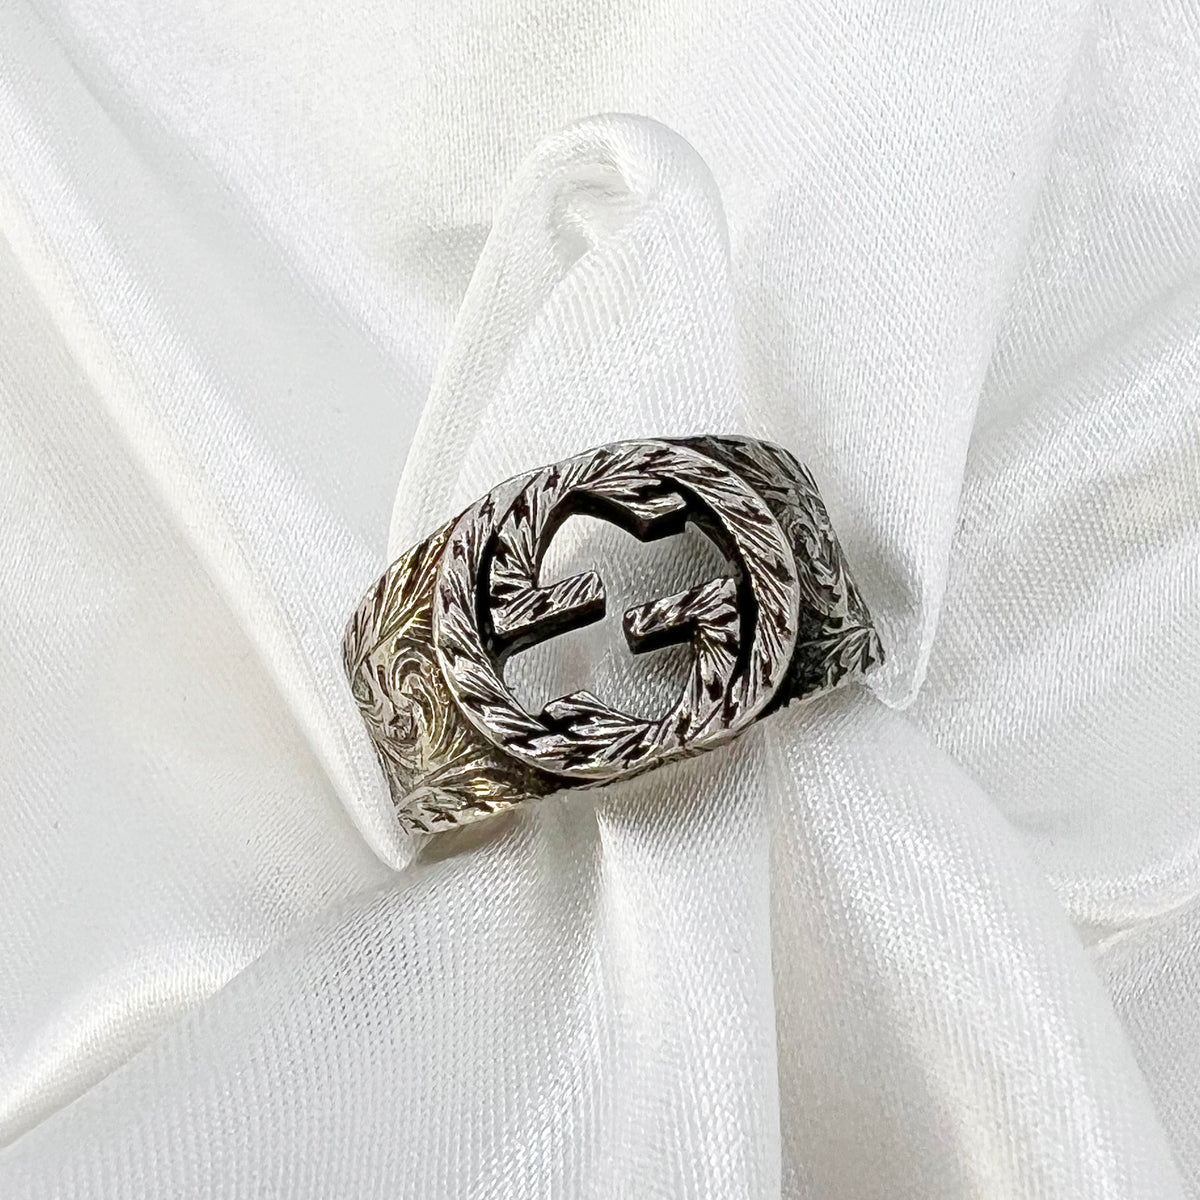 Guaranteed Authentic Gucci Men's Interlocking GG Sterling Silver Paisley Ring 925 Sterling Silver